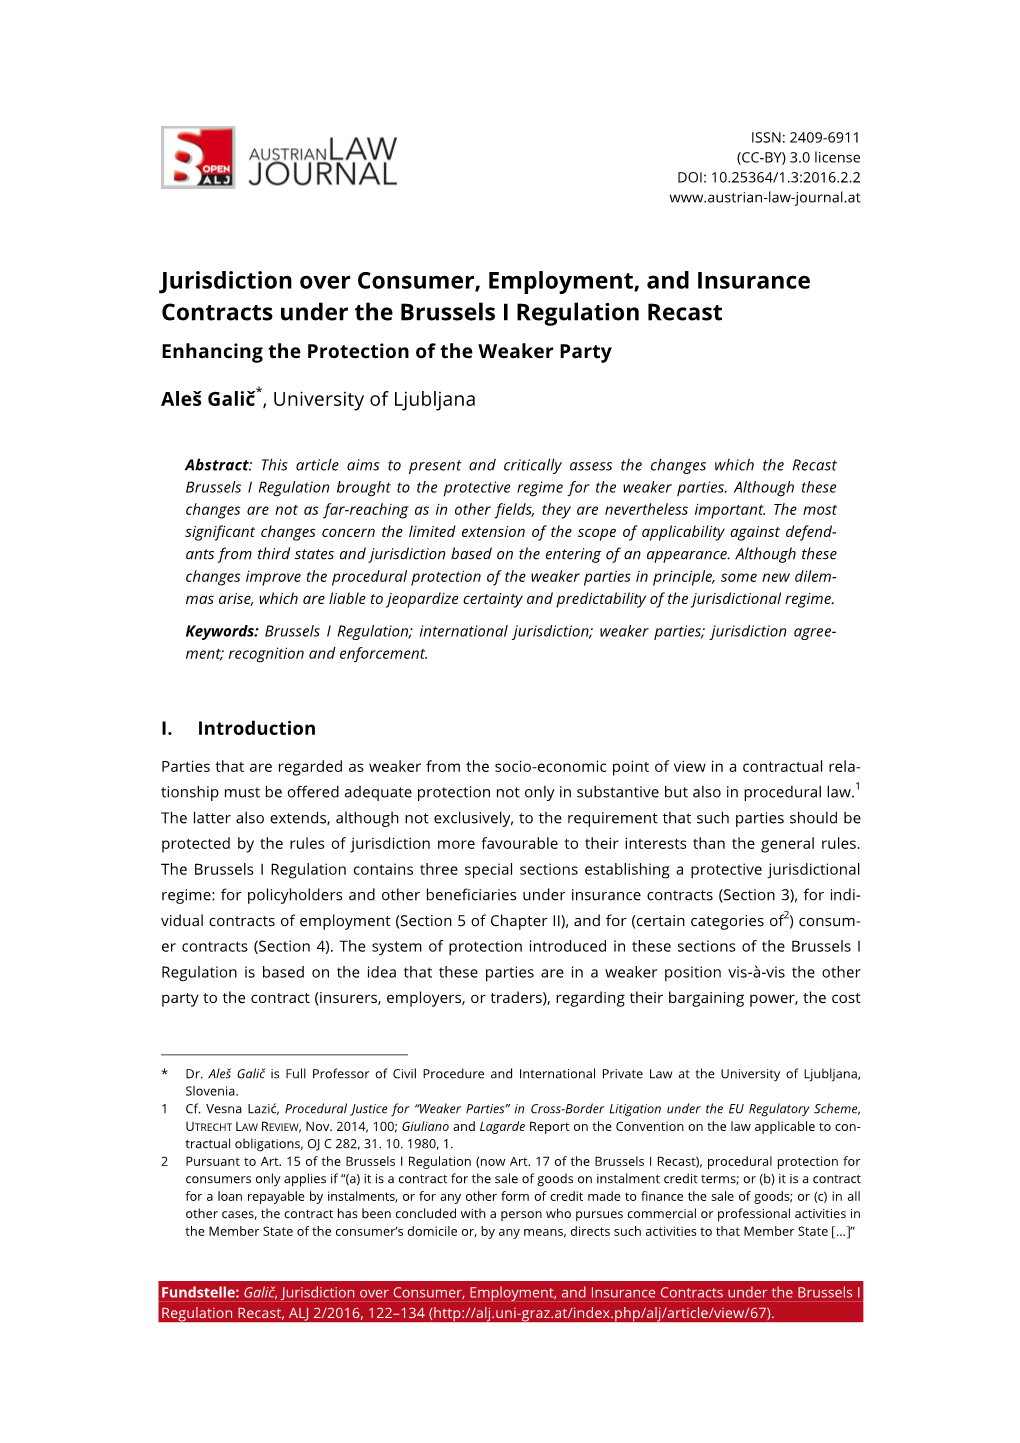 Jurisdiction Over Consumer, Employment, and Insurance Contracts Under the Brussels I Regulation Recast Enhancing the Protection of the Weaker Party